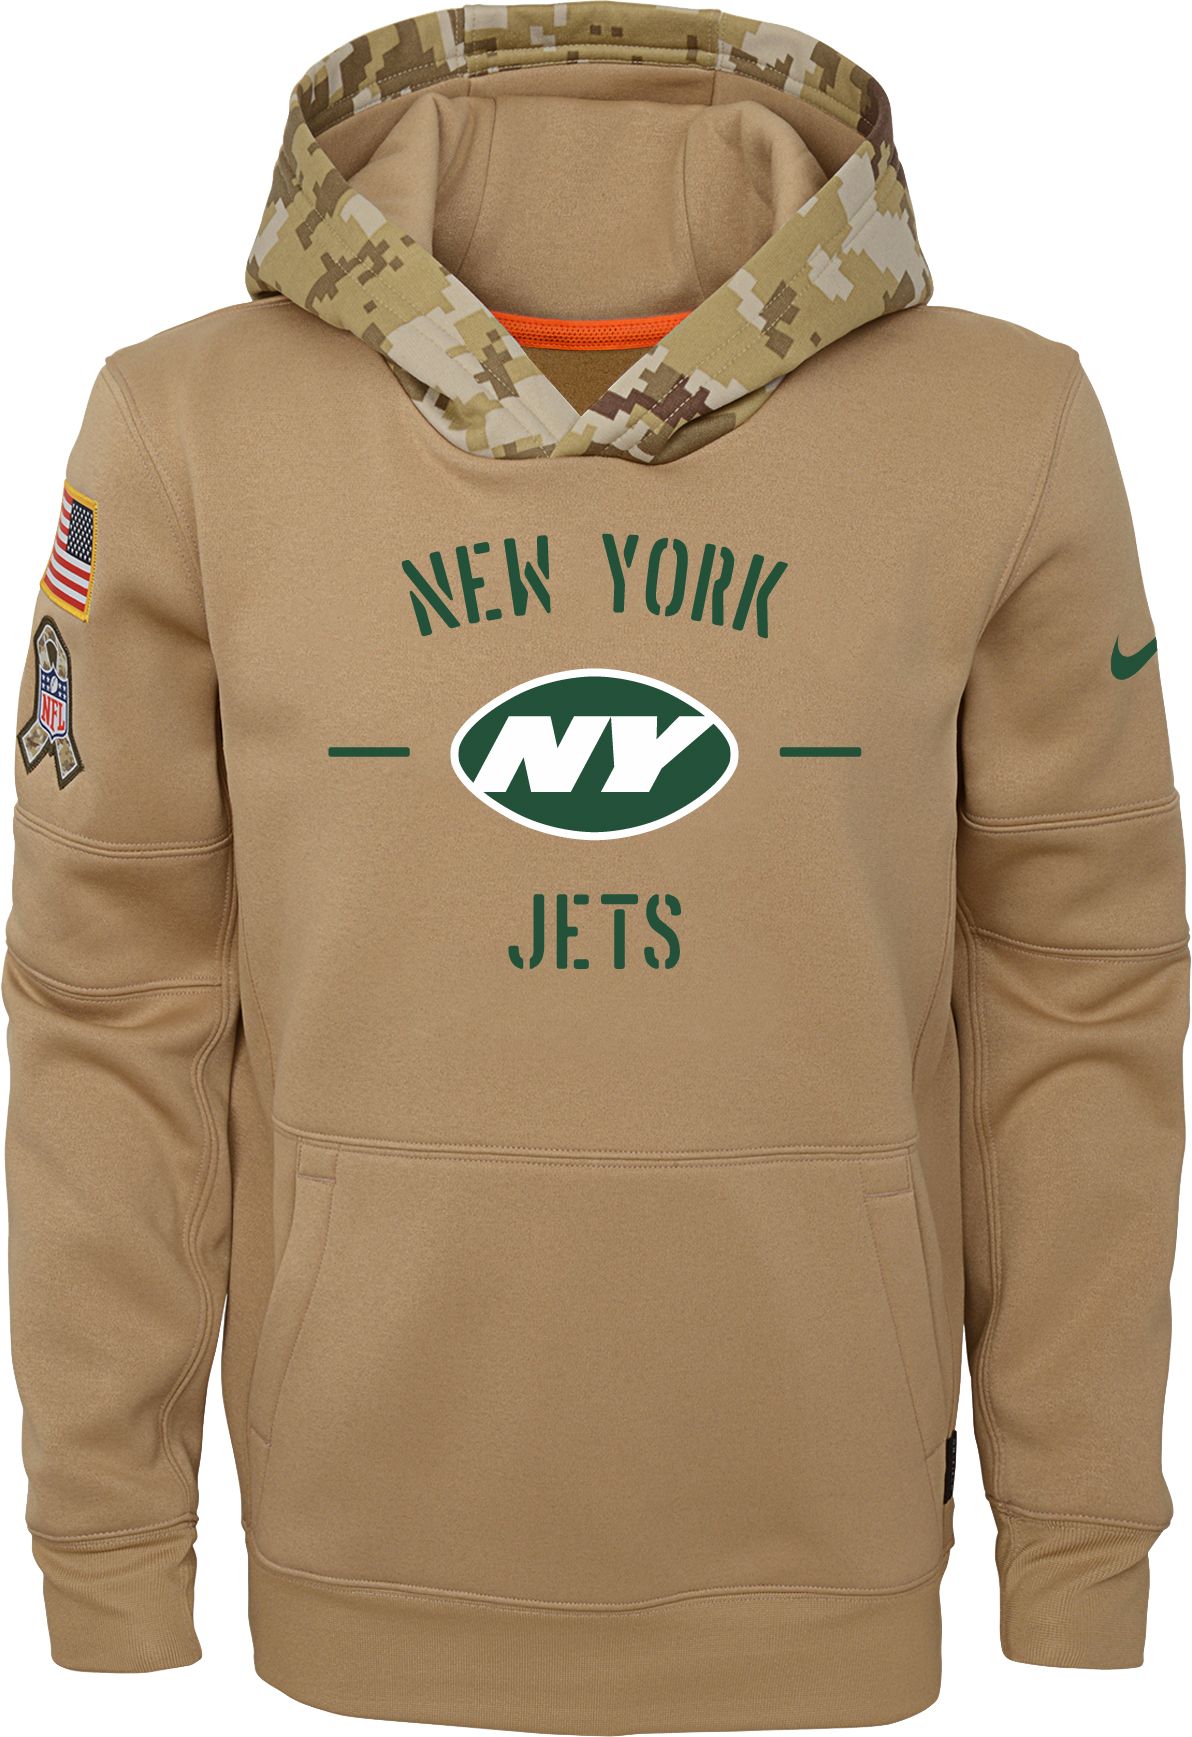 York Jets Therma-FIT Beige Camo Hoodie 